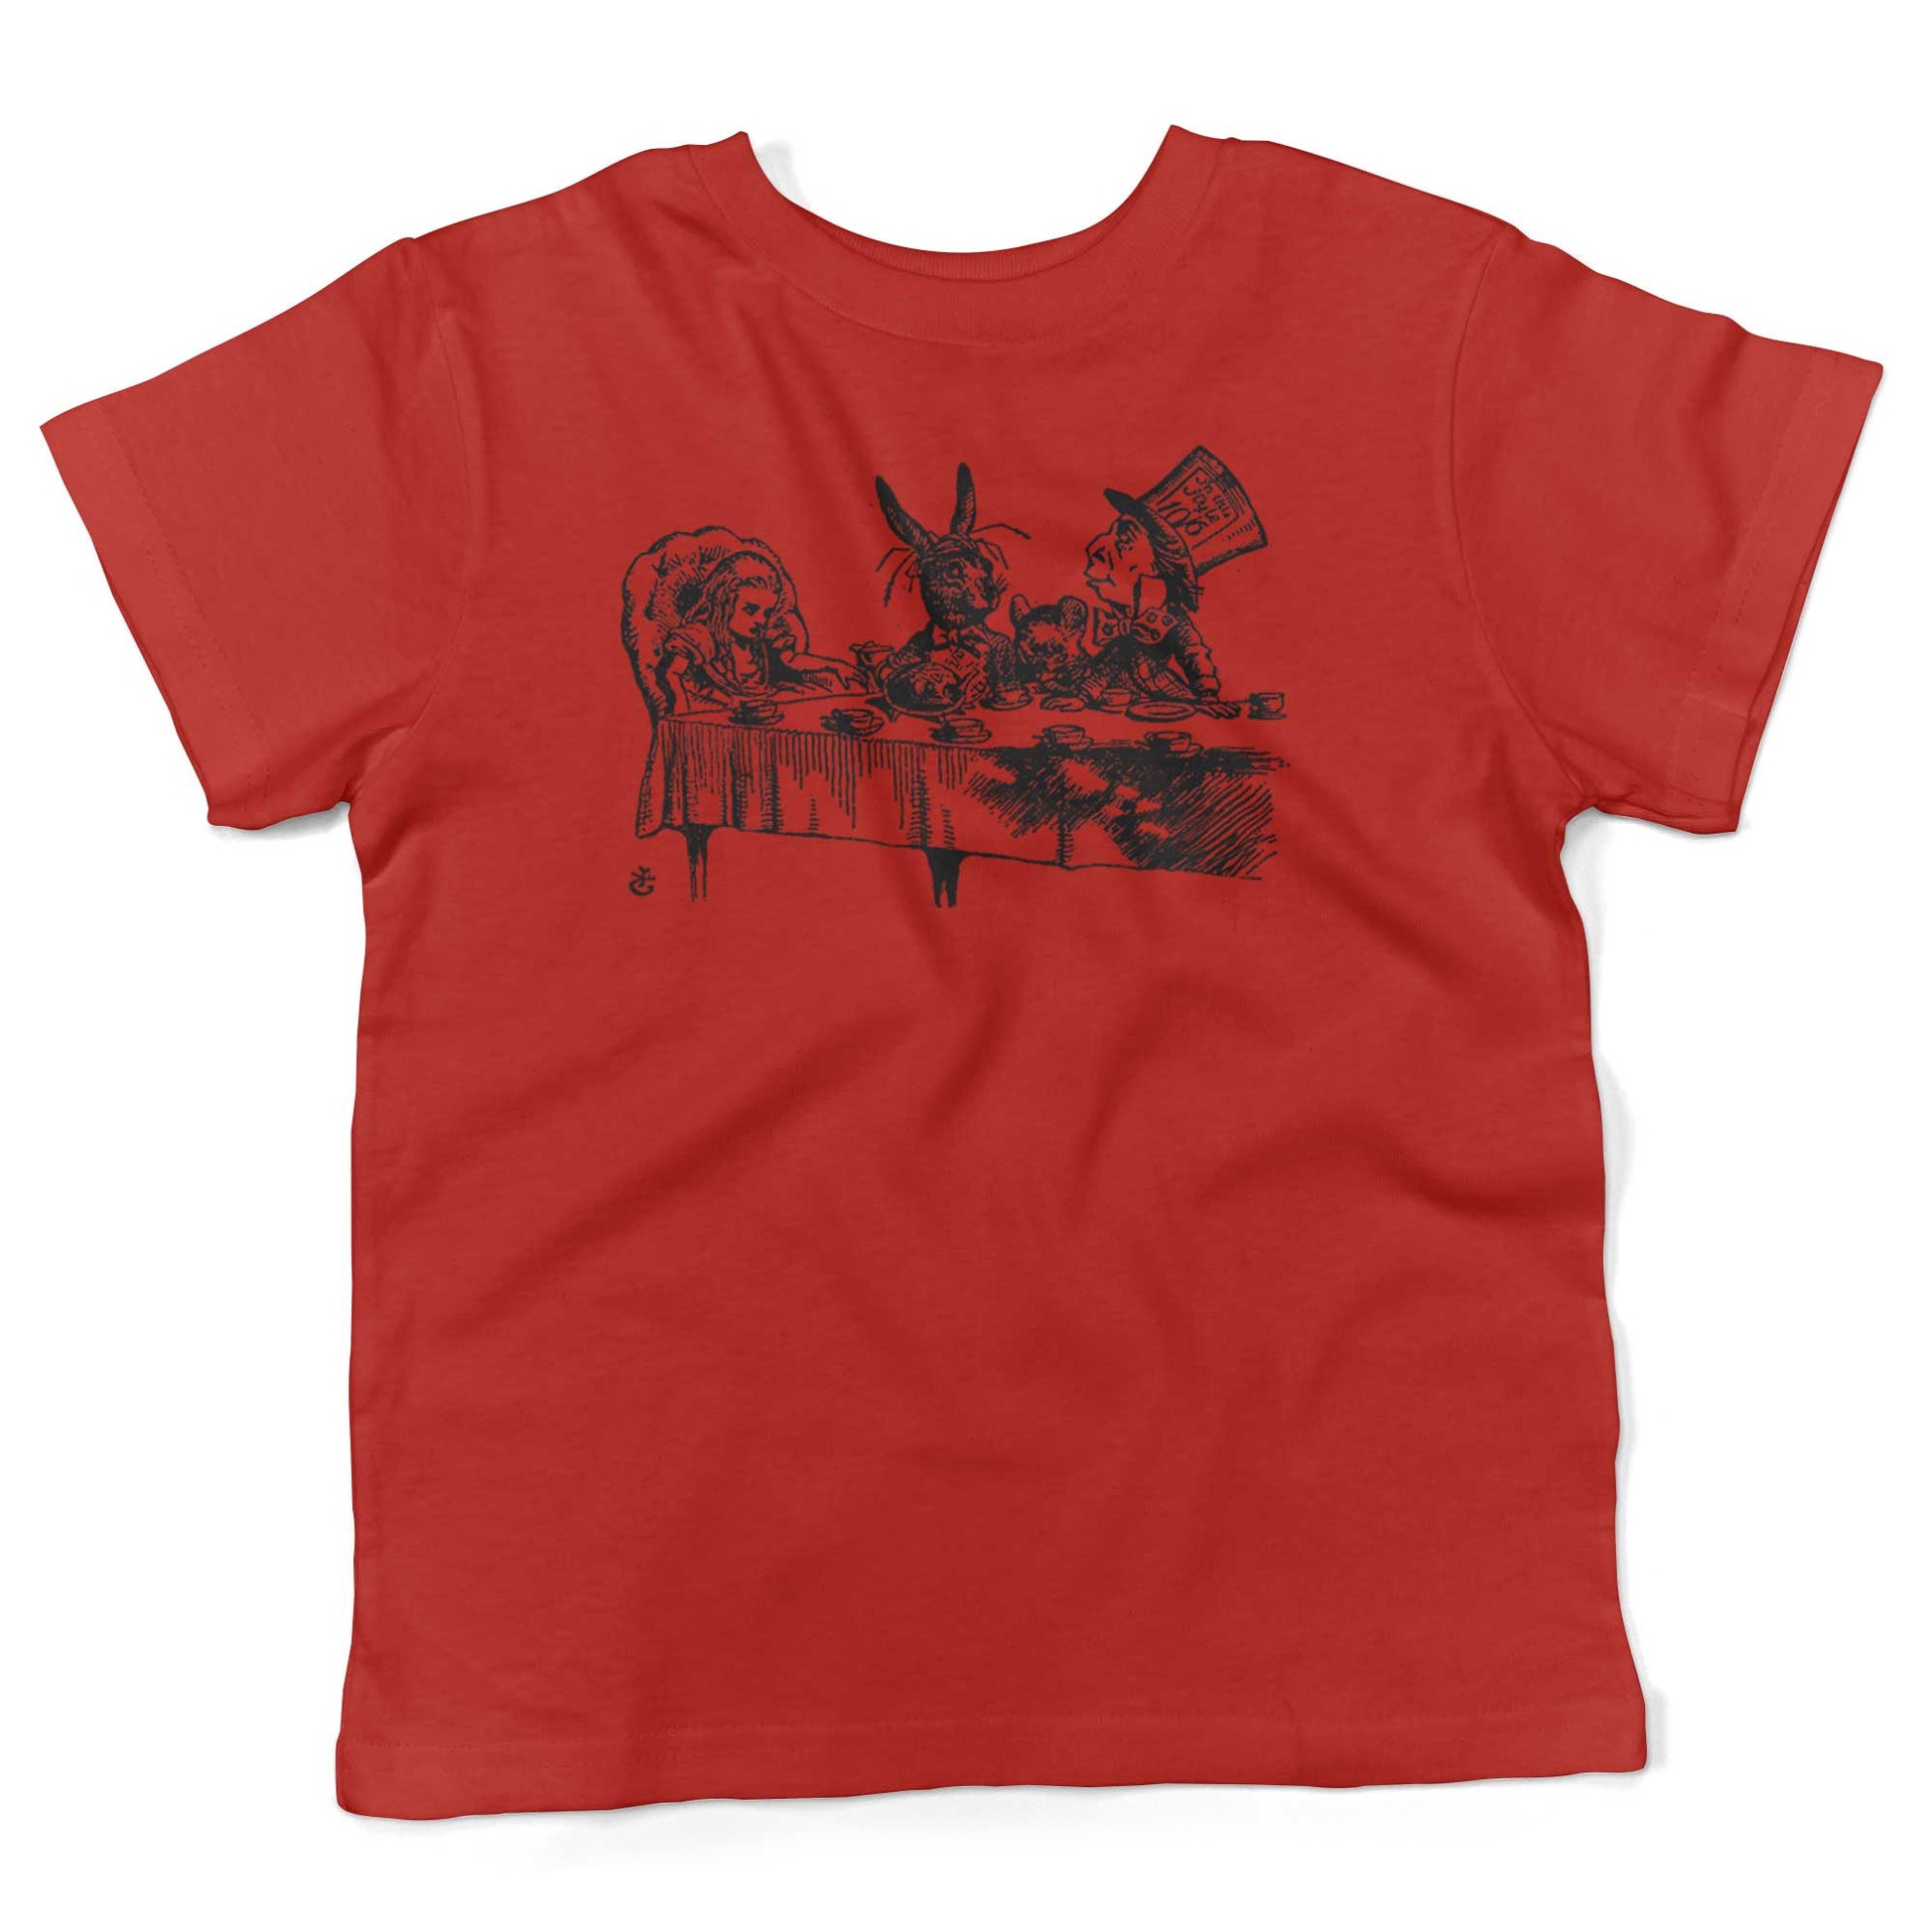 Alice In Wonderland Tea Party Toddler Shirt-Red-2T